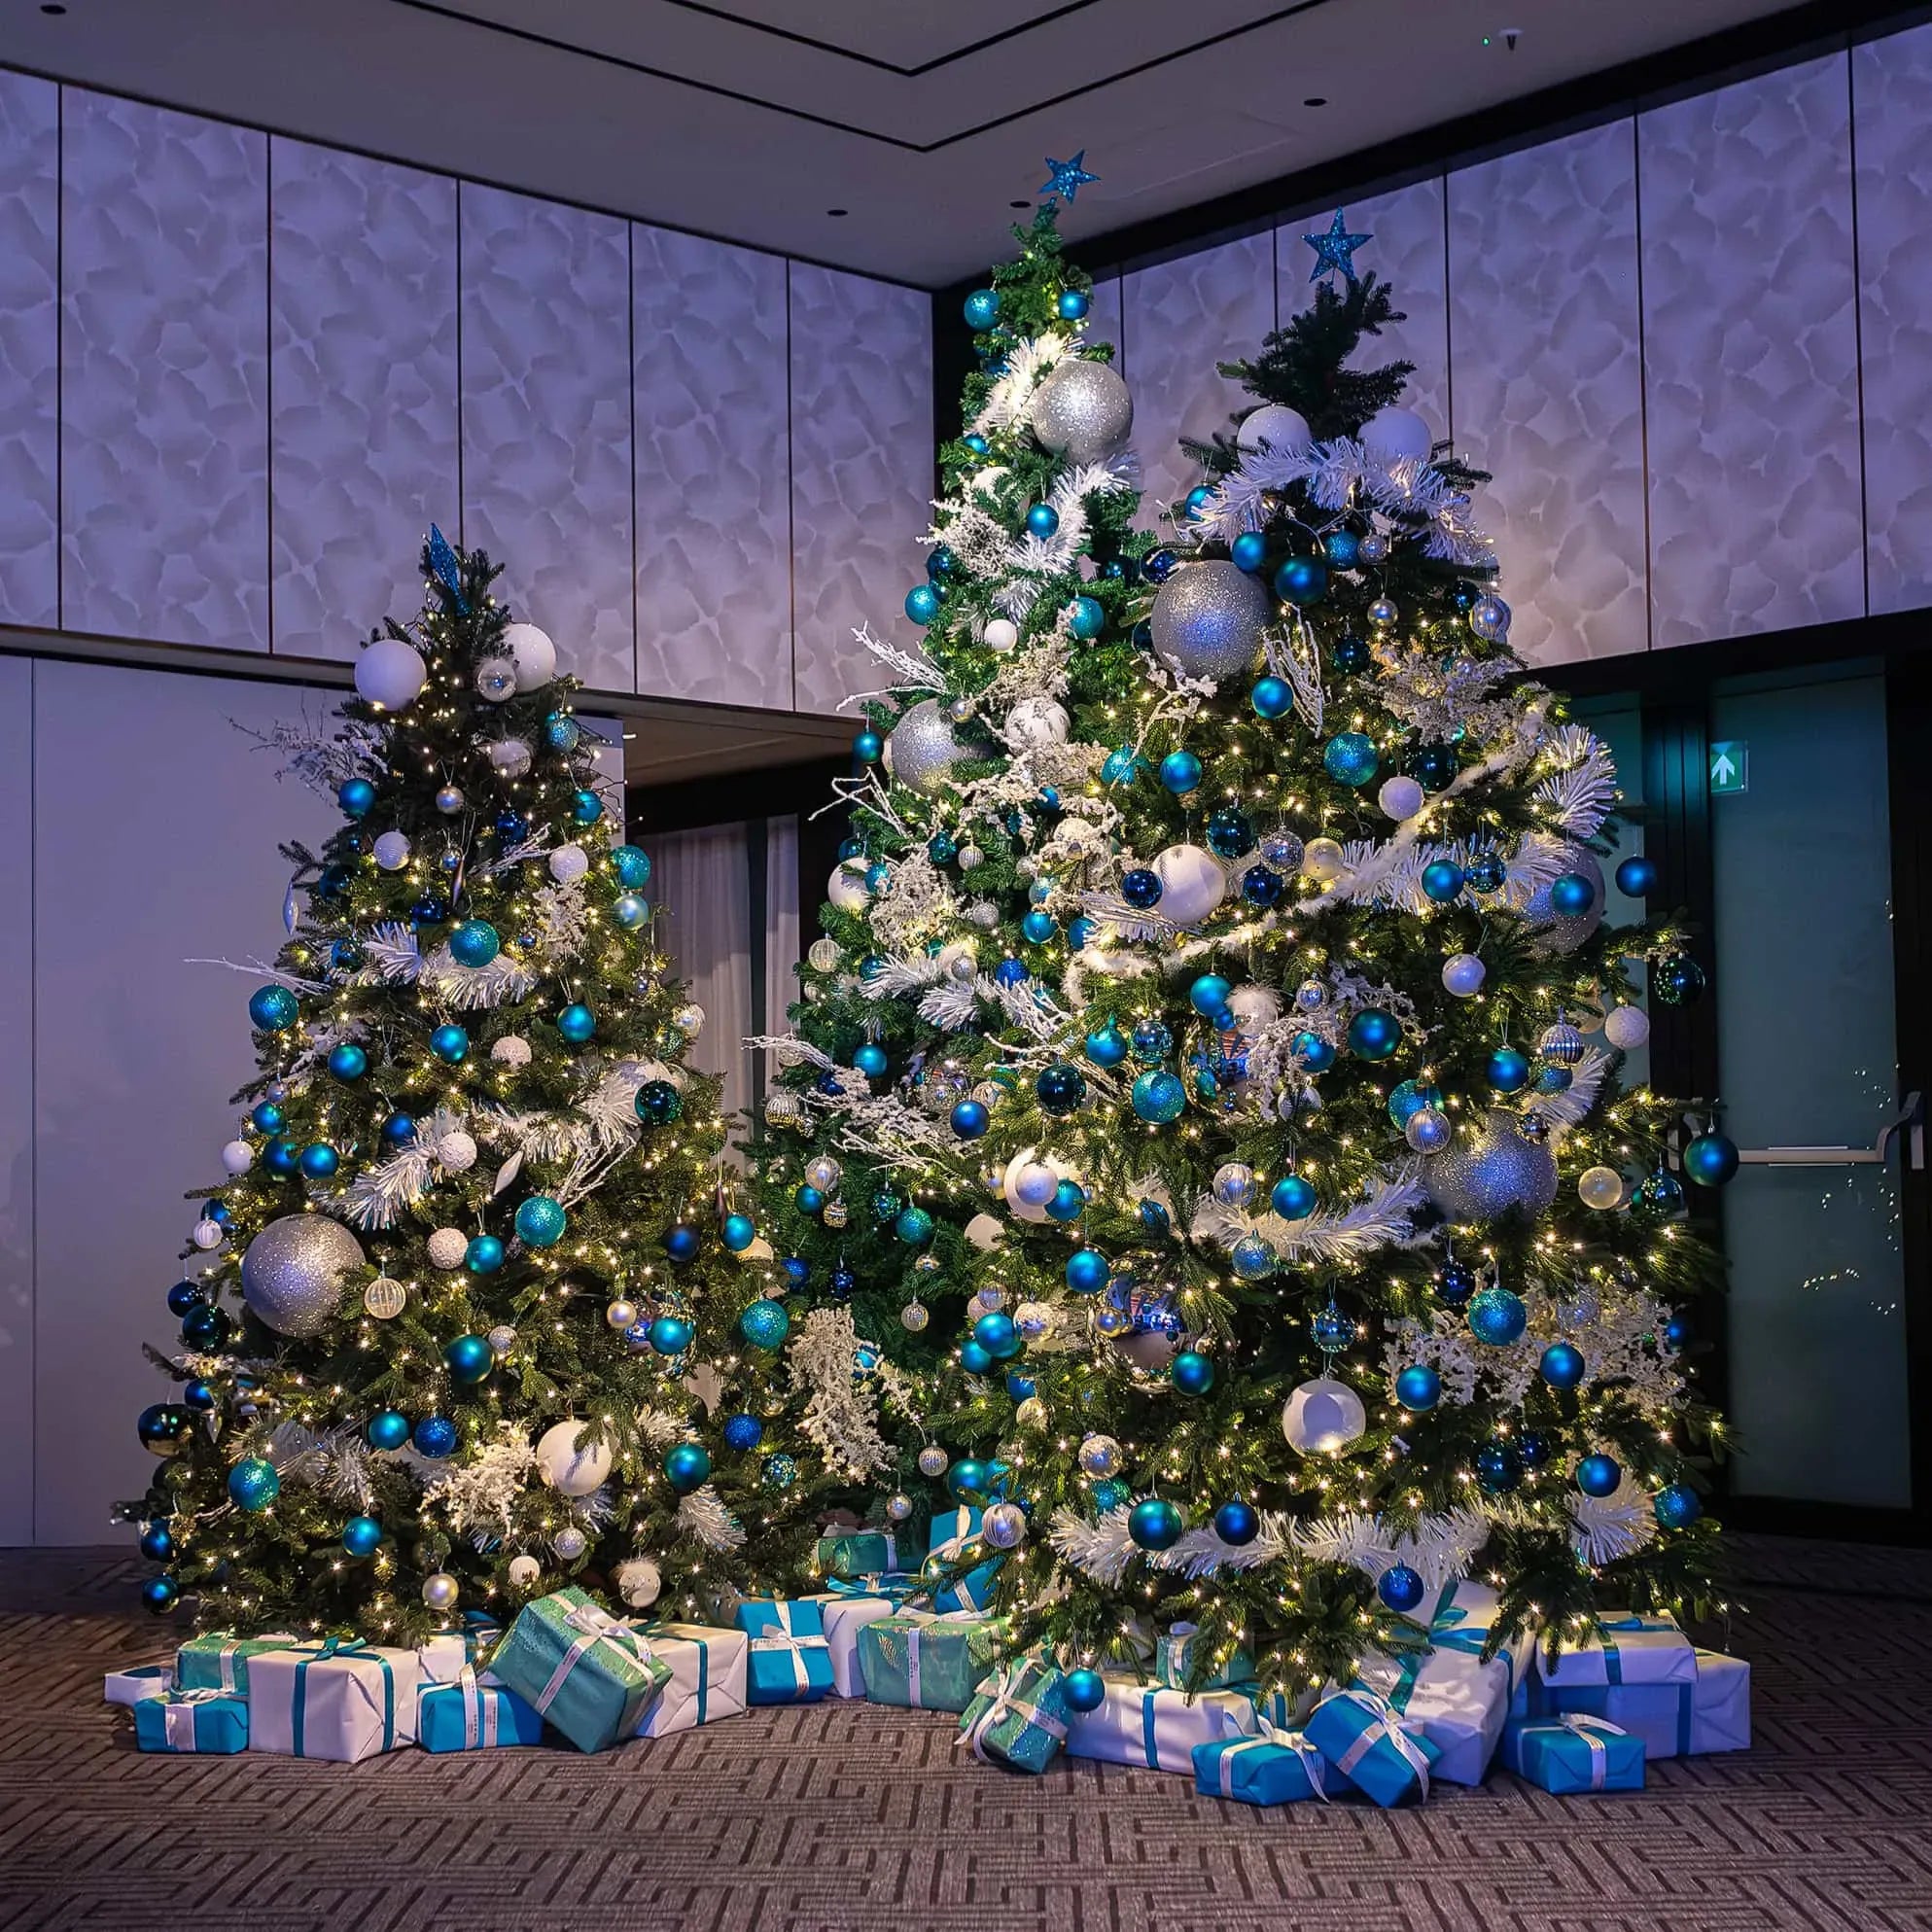 Two large Christmas trees decorated with white and blue ornaments, white lights, and topped with silver stars, surrounded by wrapped gifts in blue and silver paper, in a modern room with textured white walls and vertical light fixtures.